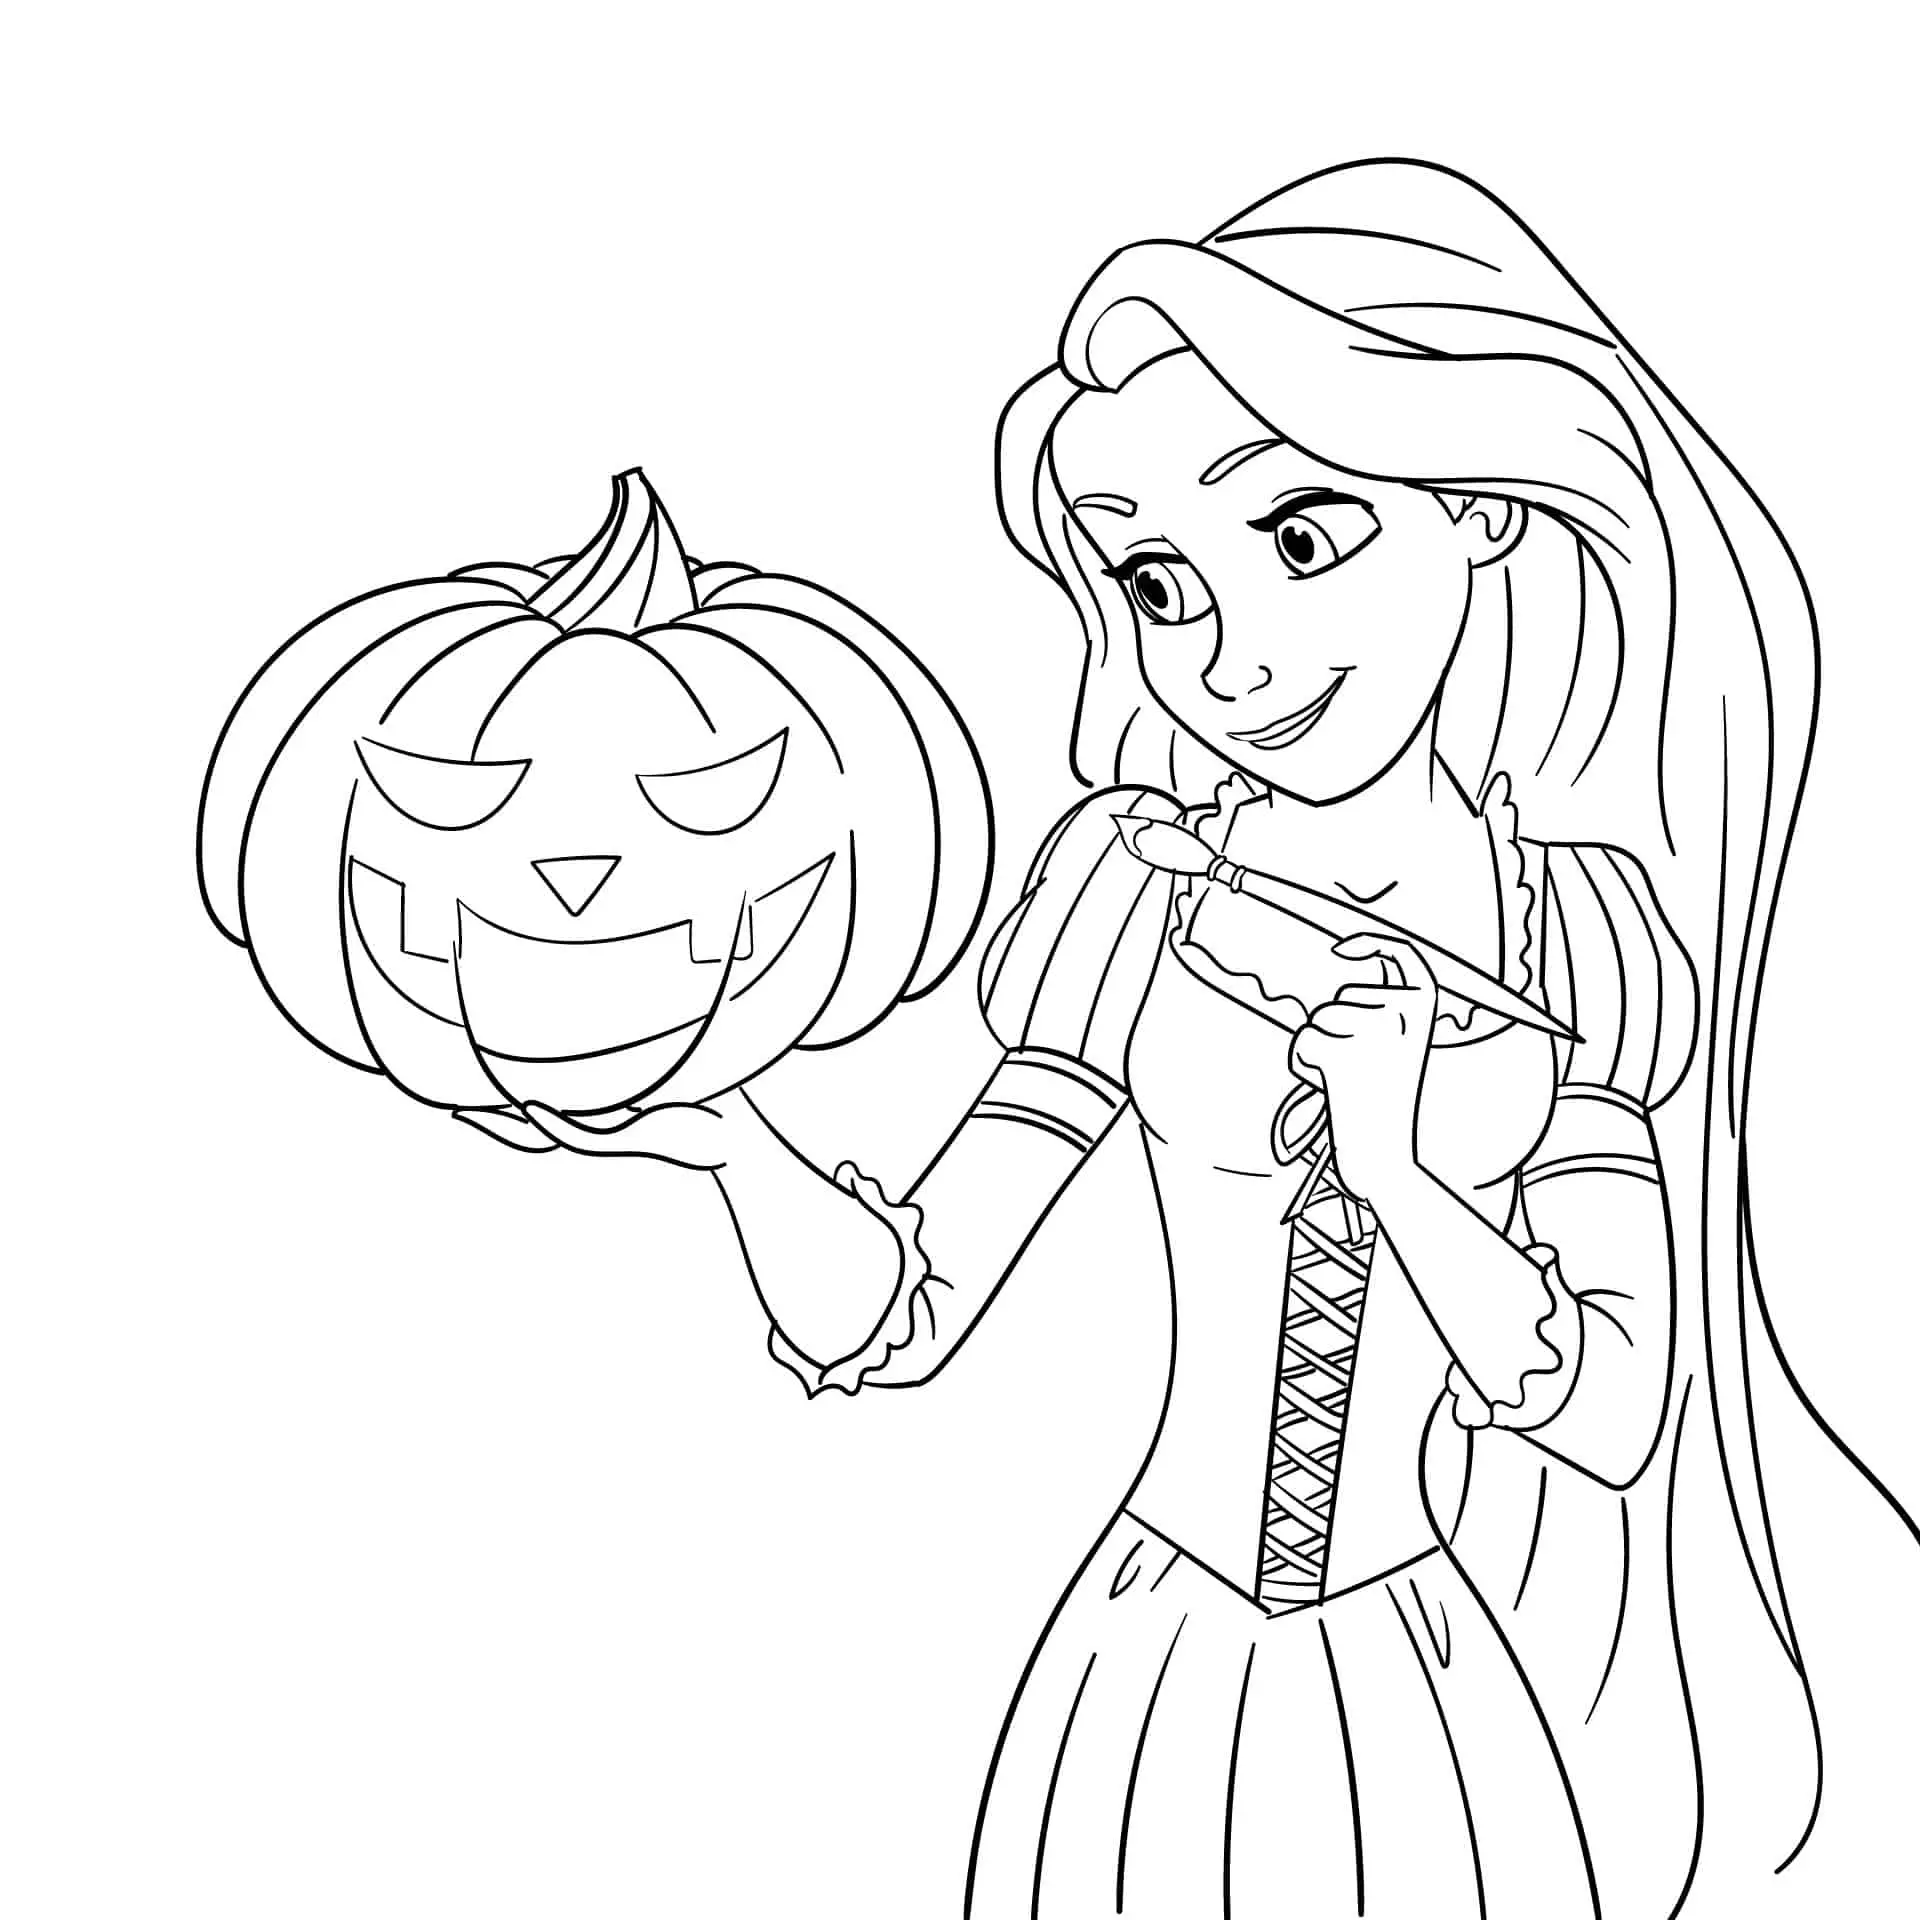 Disney Halloween Coloring Pages My Amusing Adventures